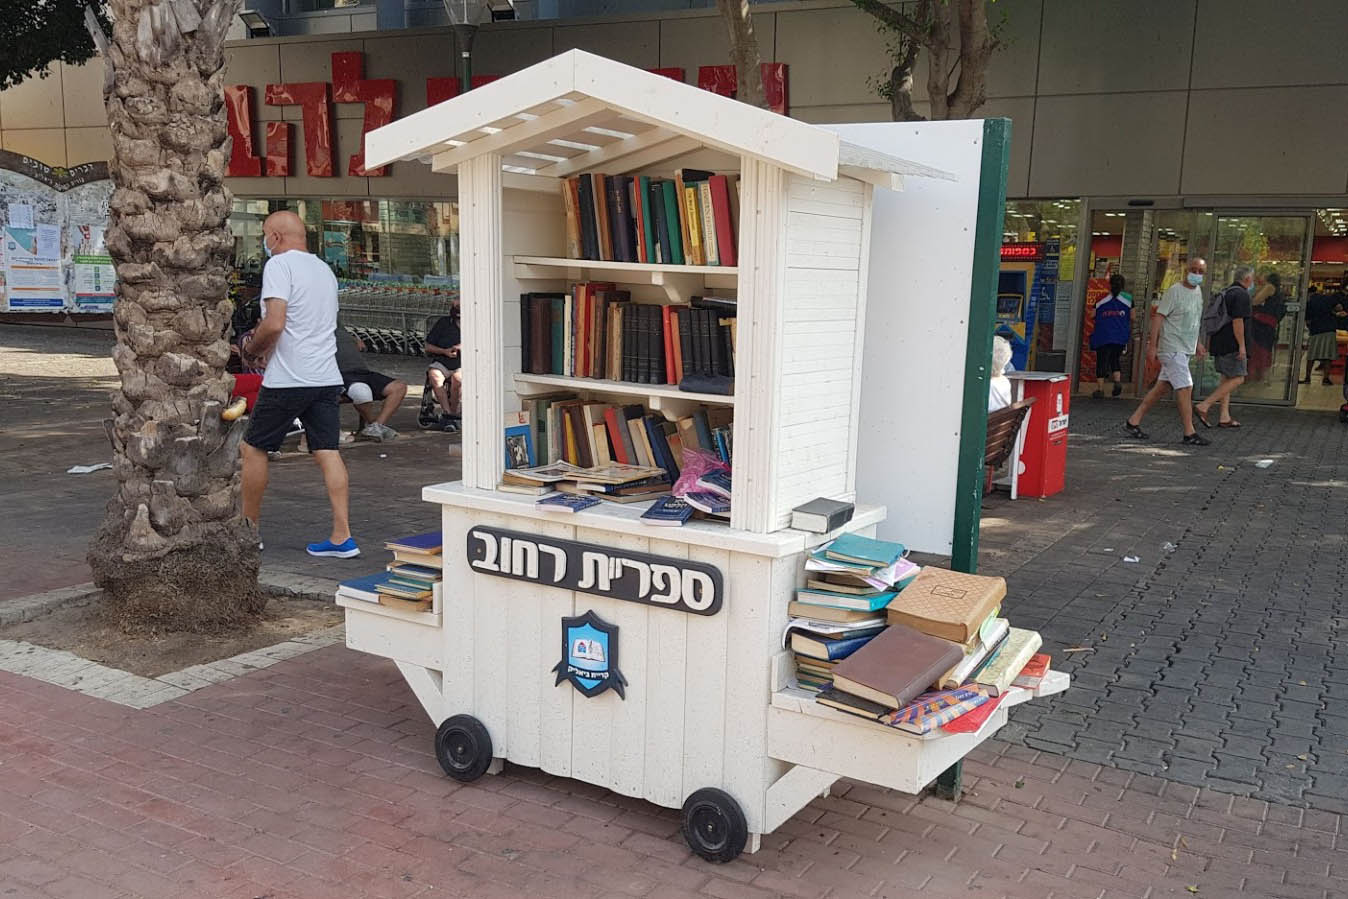 Guy Super-Singer at a street library in Mazkeret Batya. &quot;I want to encourage people to read more. There’s coronavirus now, the shops are closed, but there are libraries next to you.&quot; (Photo: Private album)